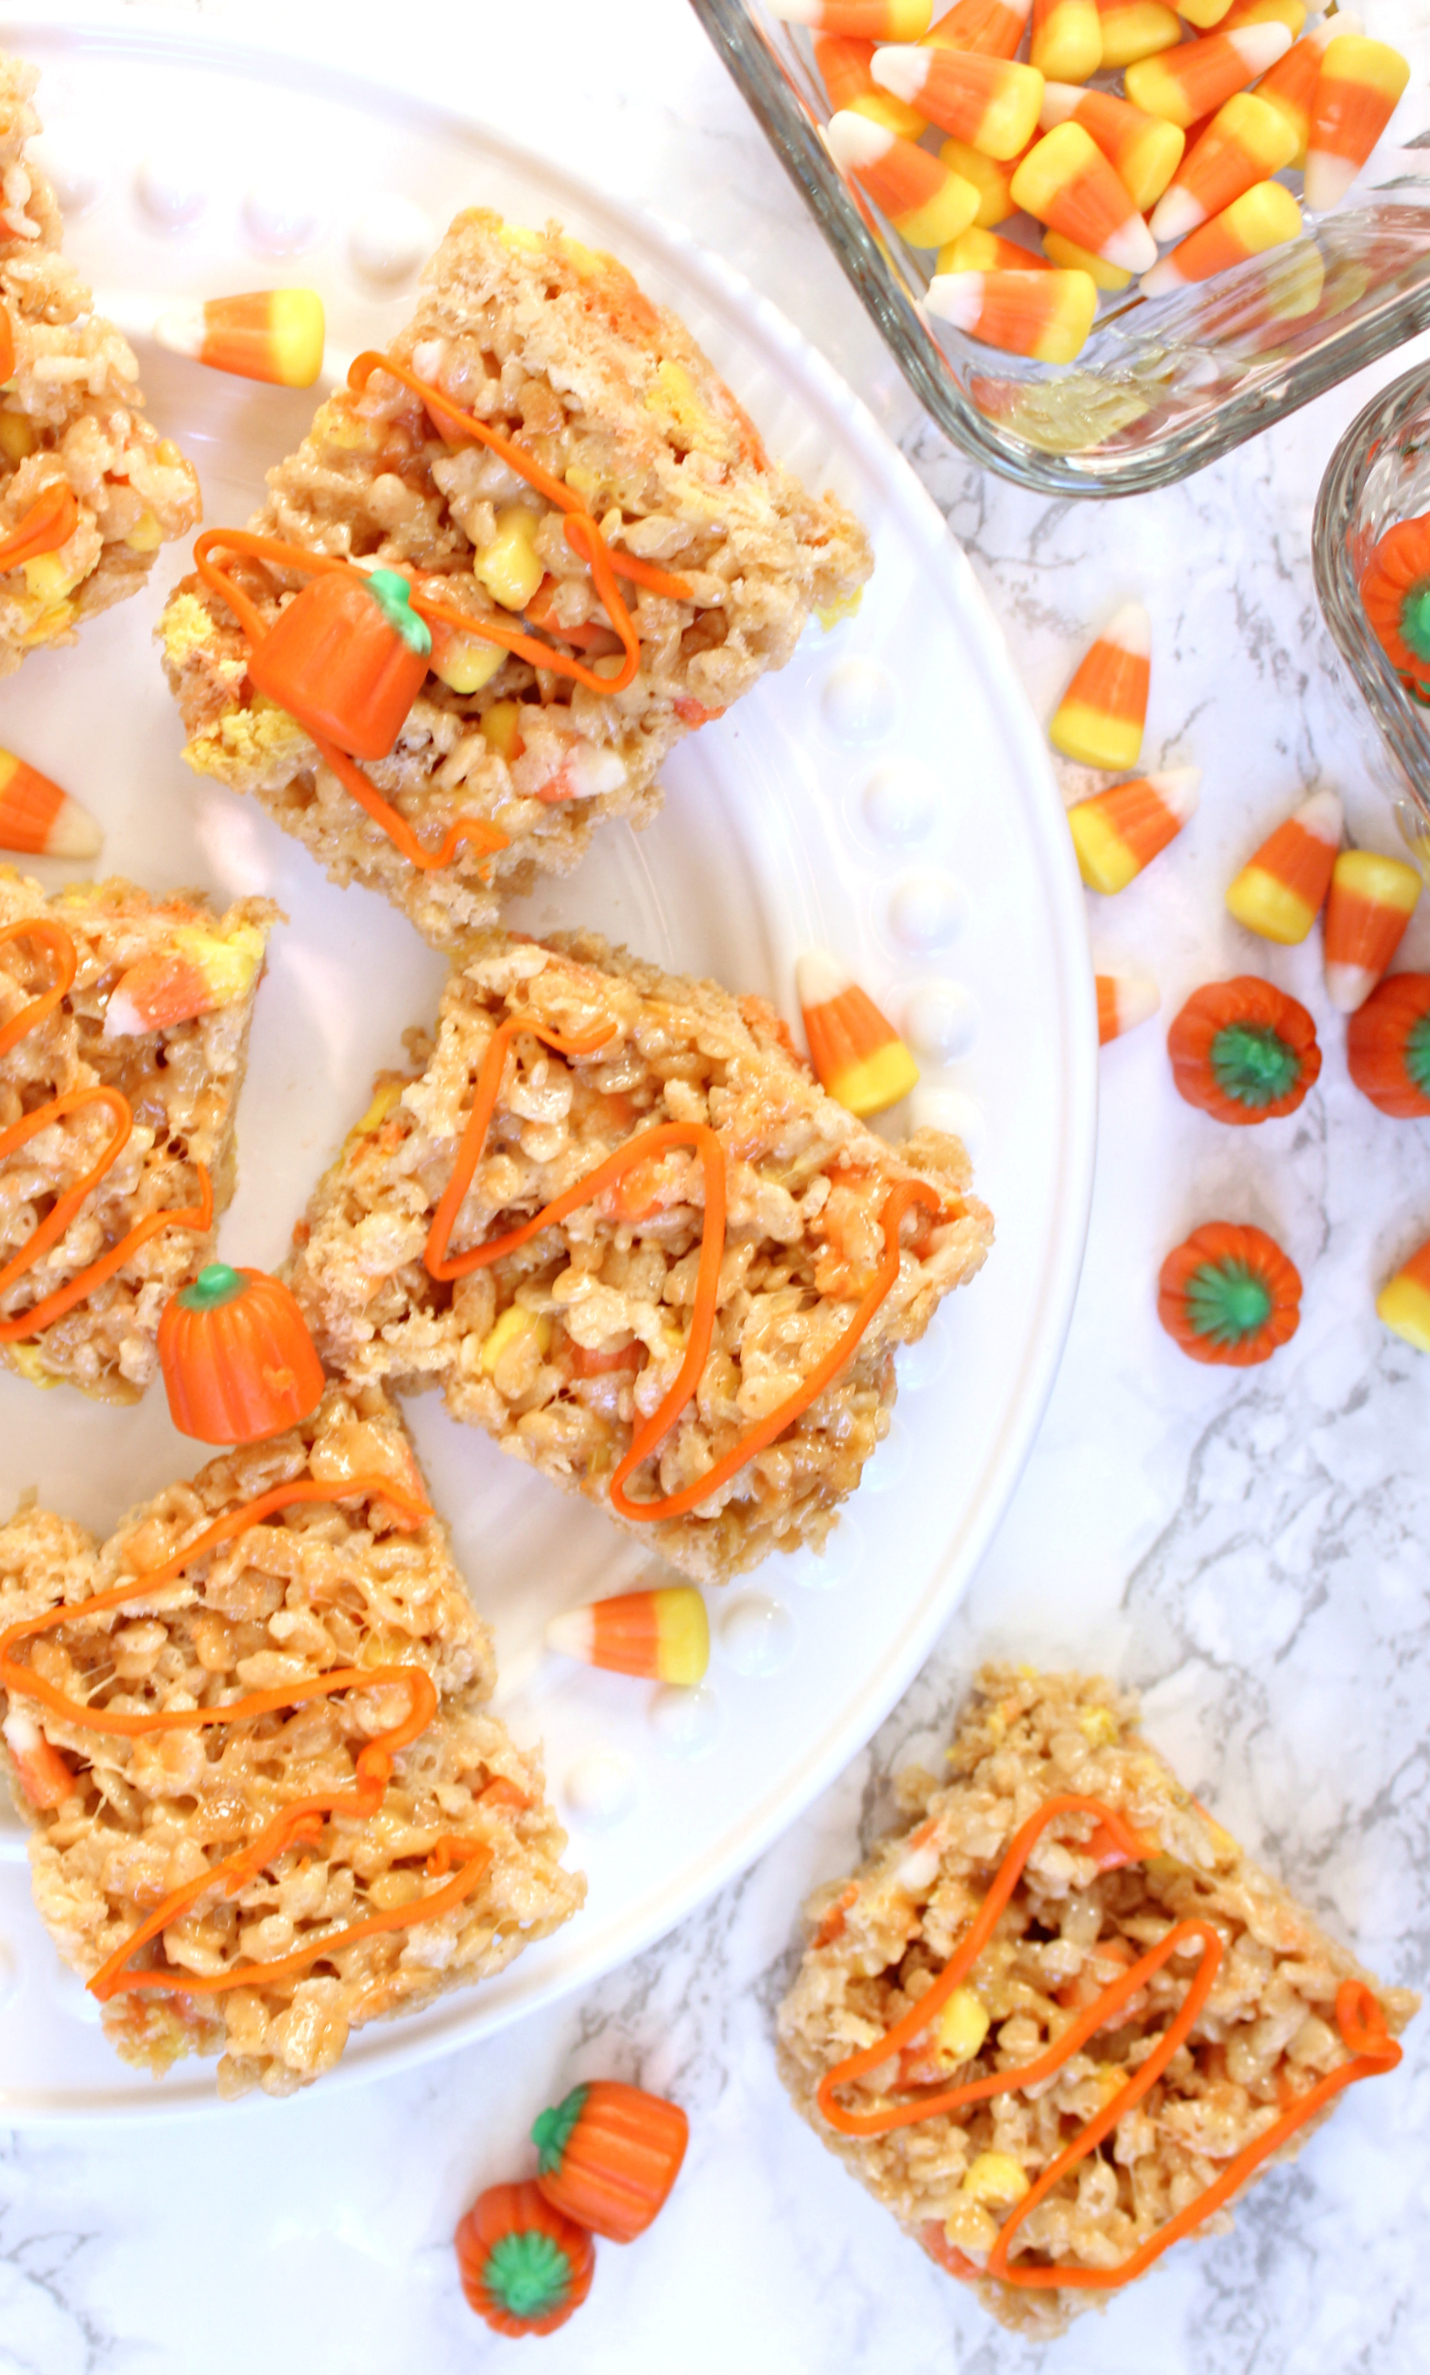 Candy corn rice krispies make a fun, simple, and delicious Halloween snack